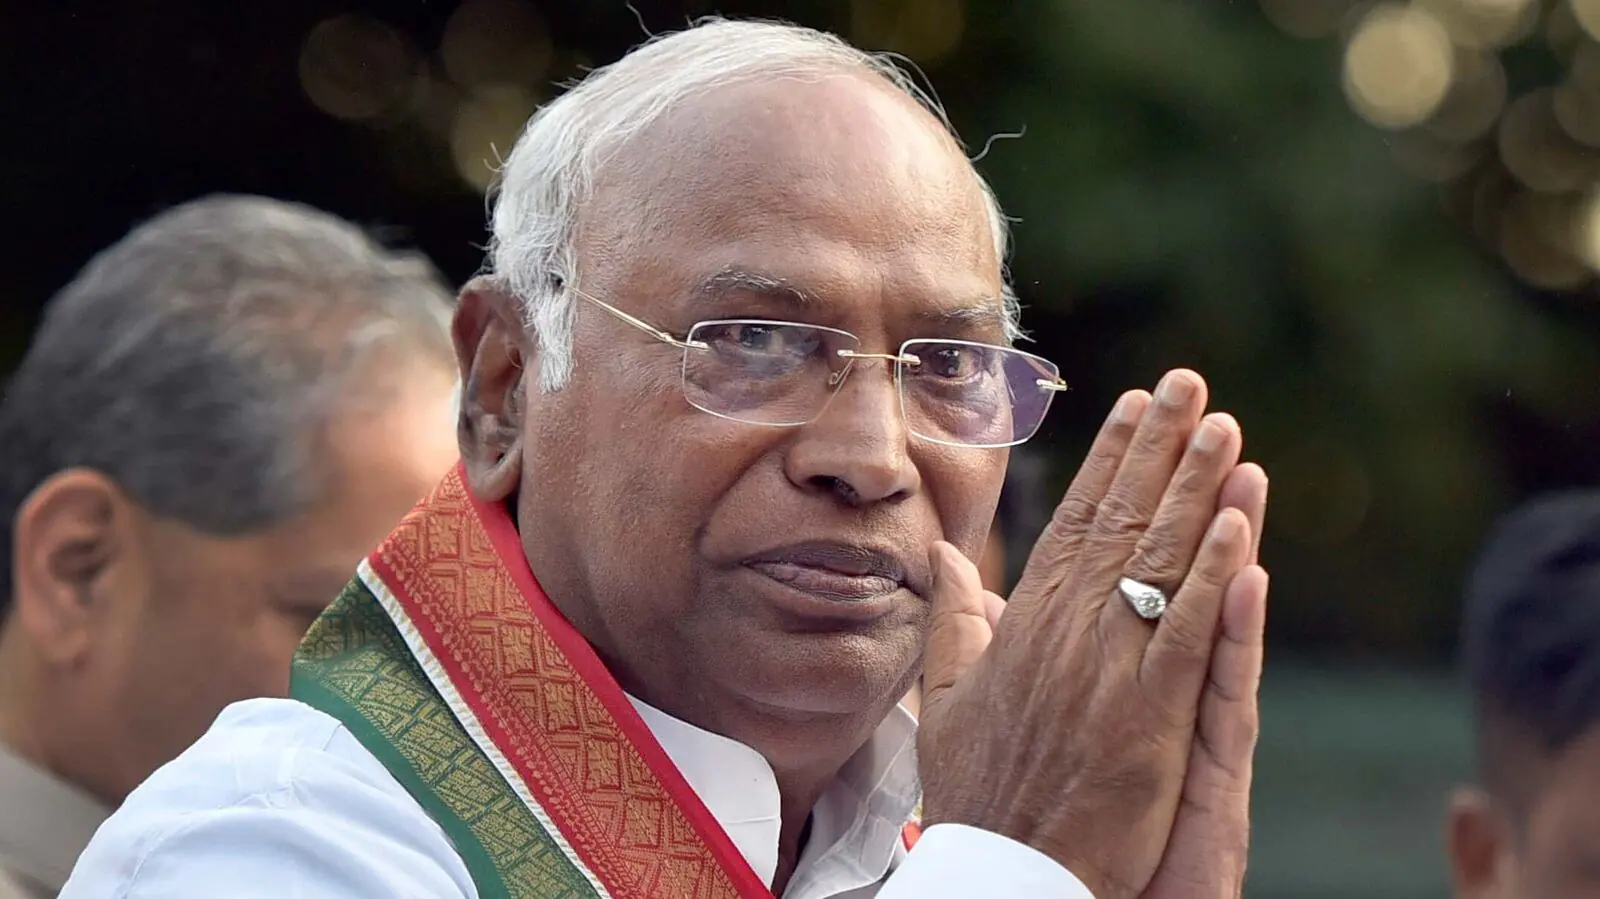 “My Self-Respect Challenged”: Mallikarjun Kharge Reacts After Mic Turned Off in Rajya Sabha.